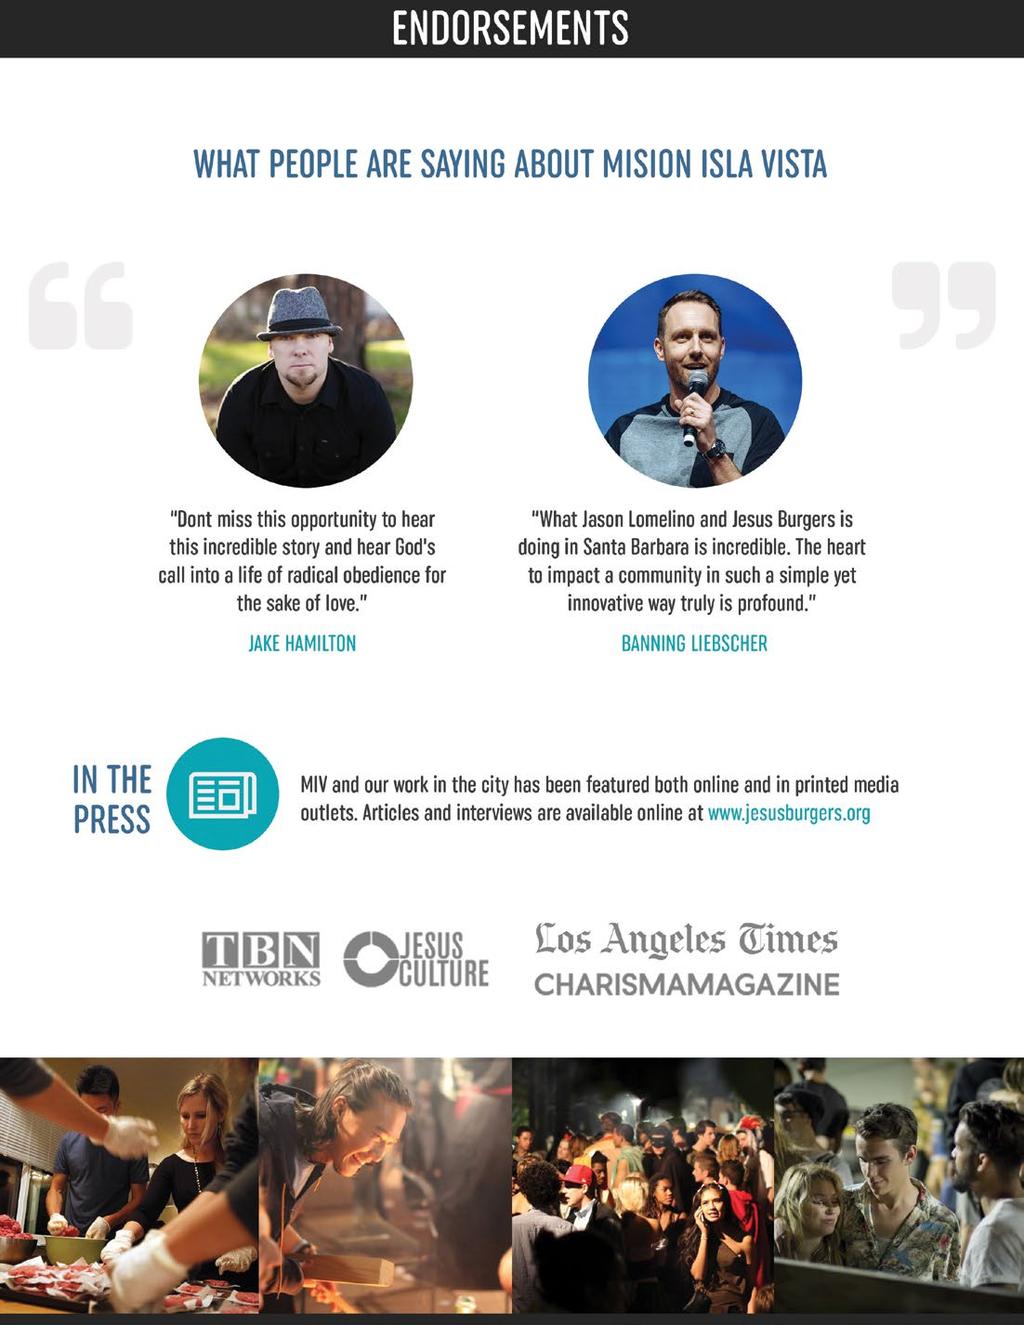 ENDORSEMENTS WHAT PEOPLE ARE SAYING ABOUT MISSION ISLA VISTA